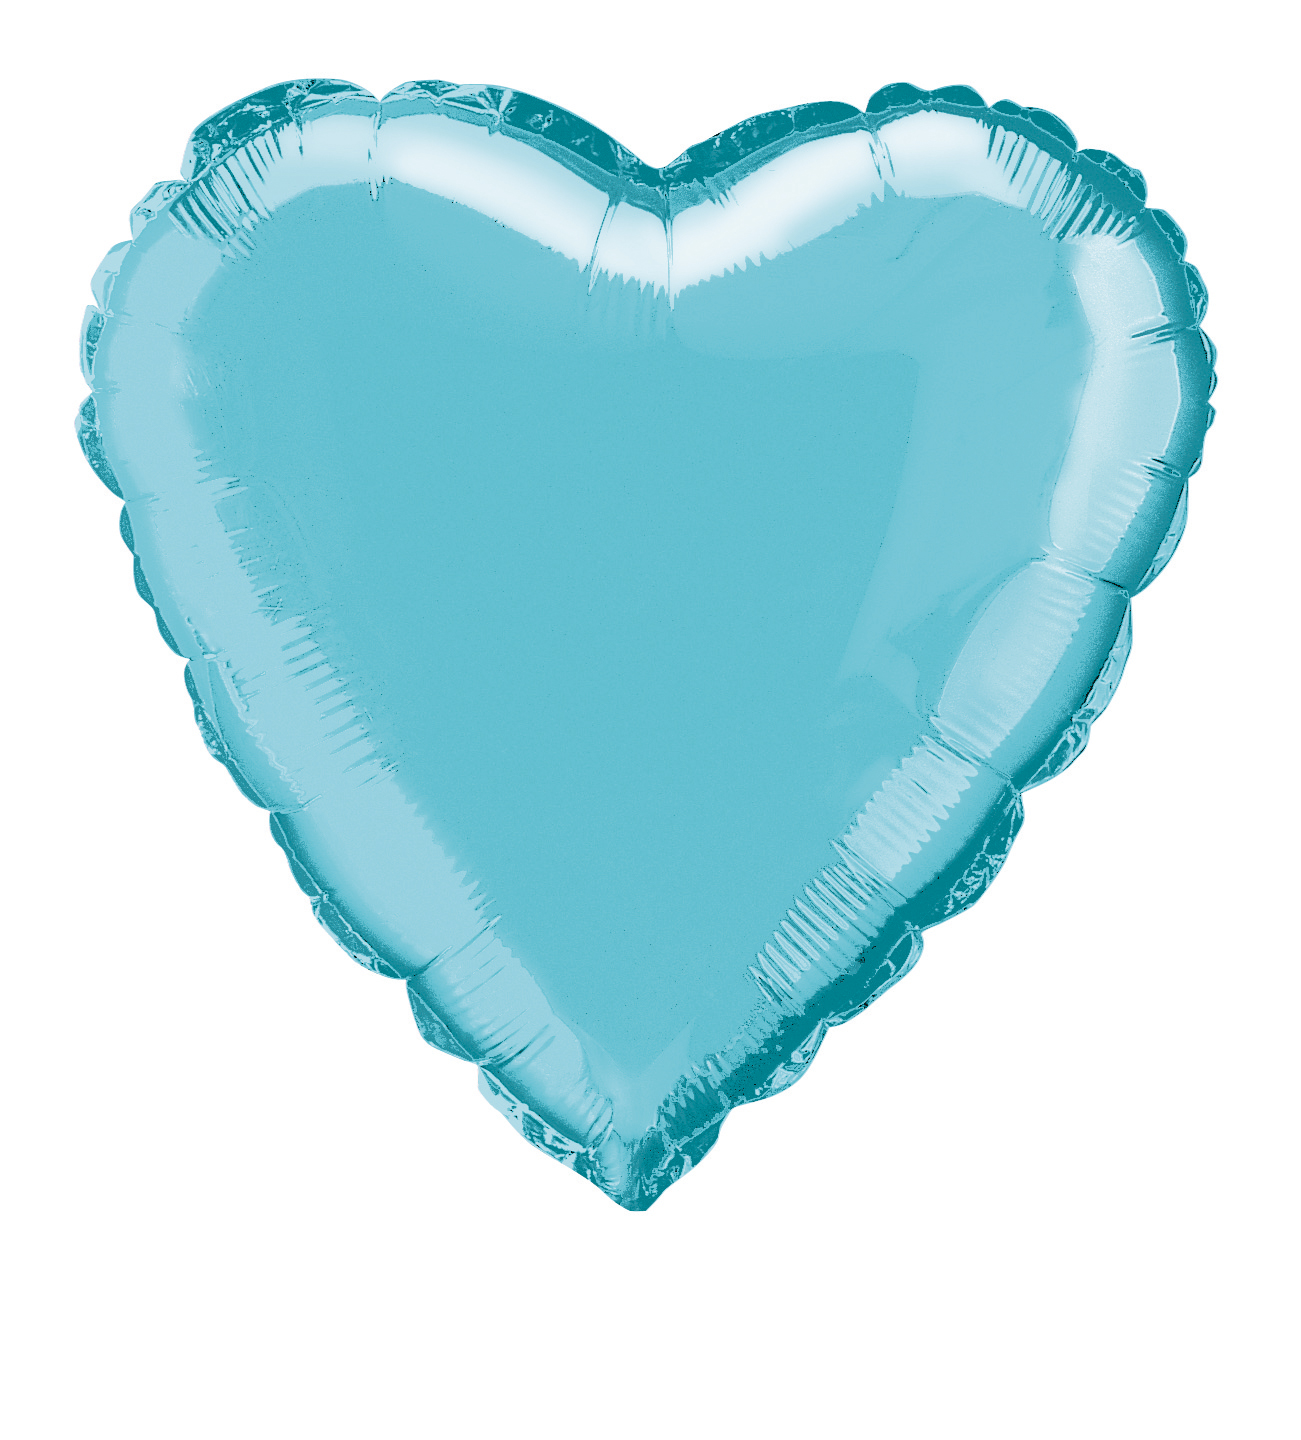 18" HEART SOLID BABY BLUE COLOR FOIL BALLOONS PRINTED 2 SIDES(Sold in 5s)